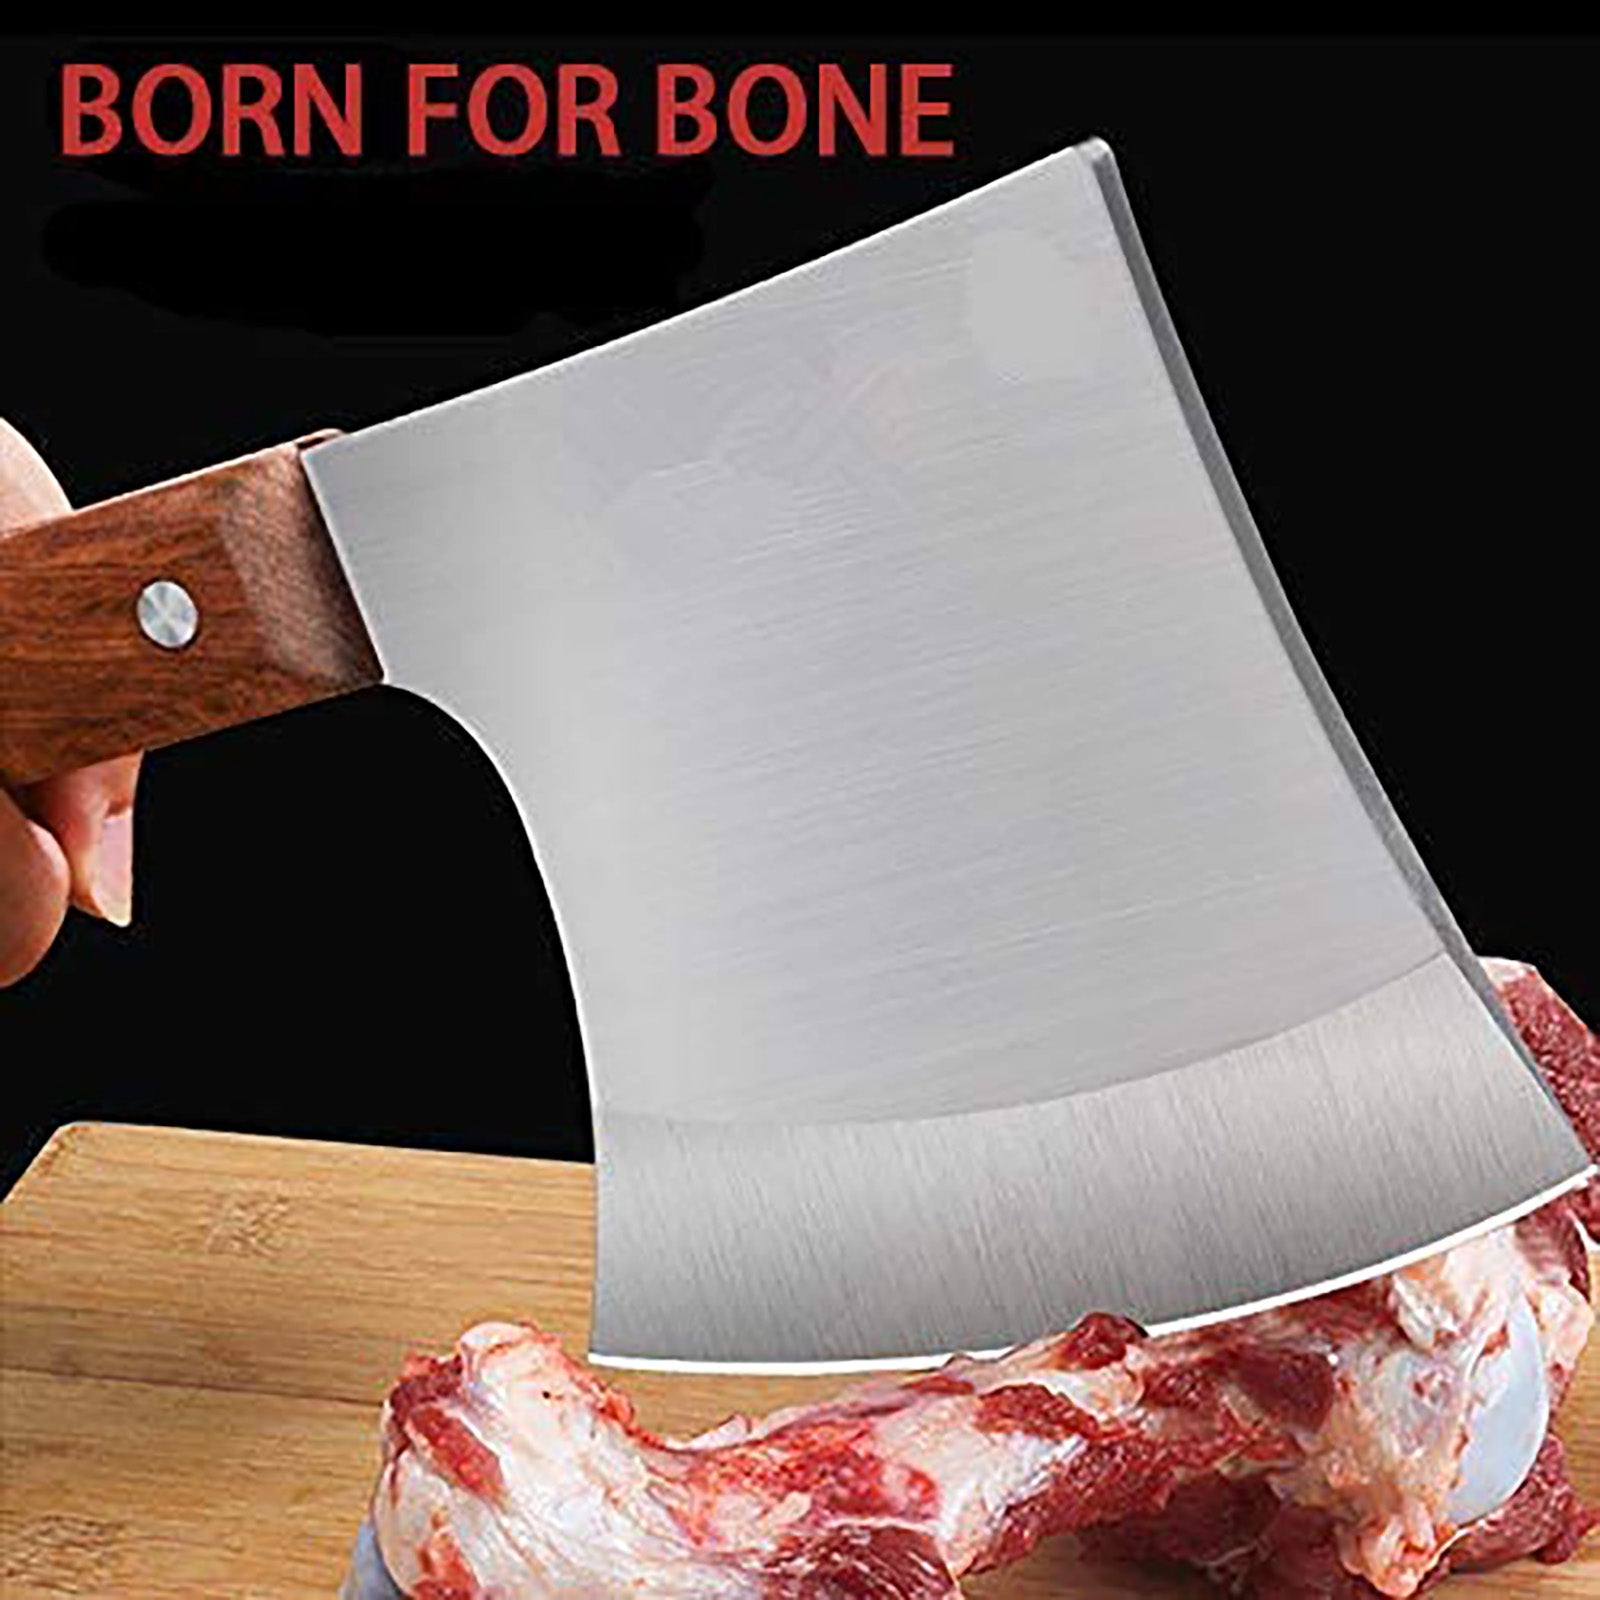 Kitory Meat Cleaver, Bone Knife, Super Massive Heavy Duty Axe Butcher  Kitchen Knife eapecially for big beef caw bones and frozen meat breaking,  2023